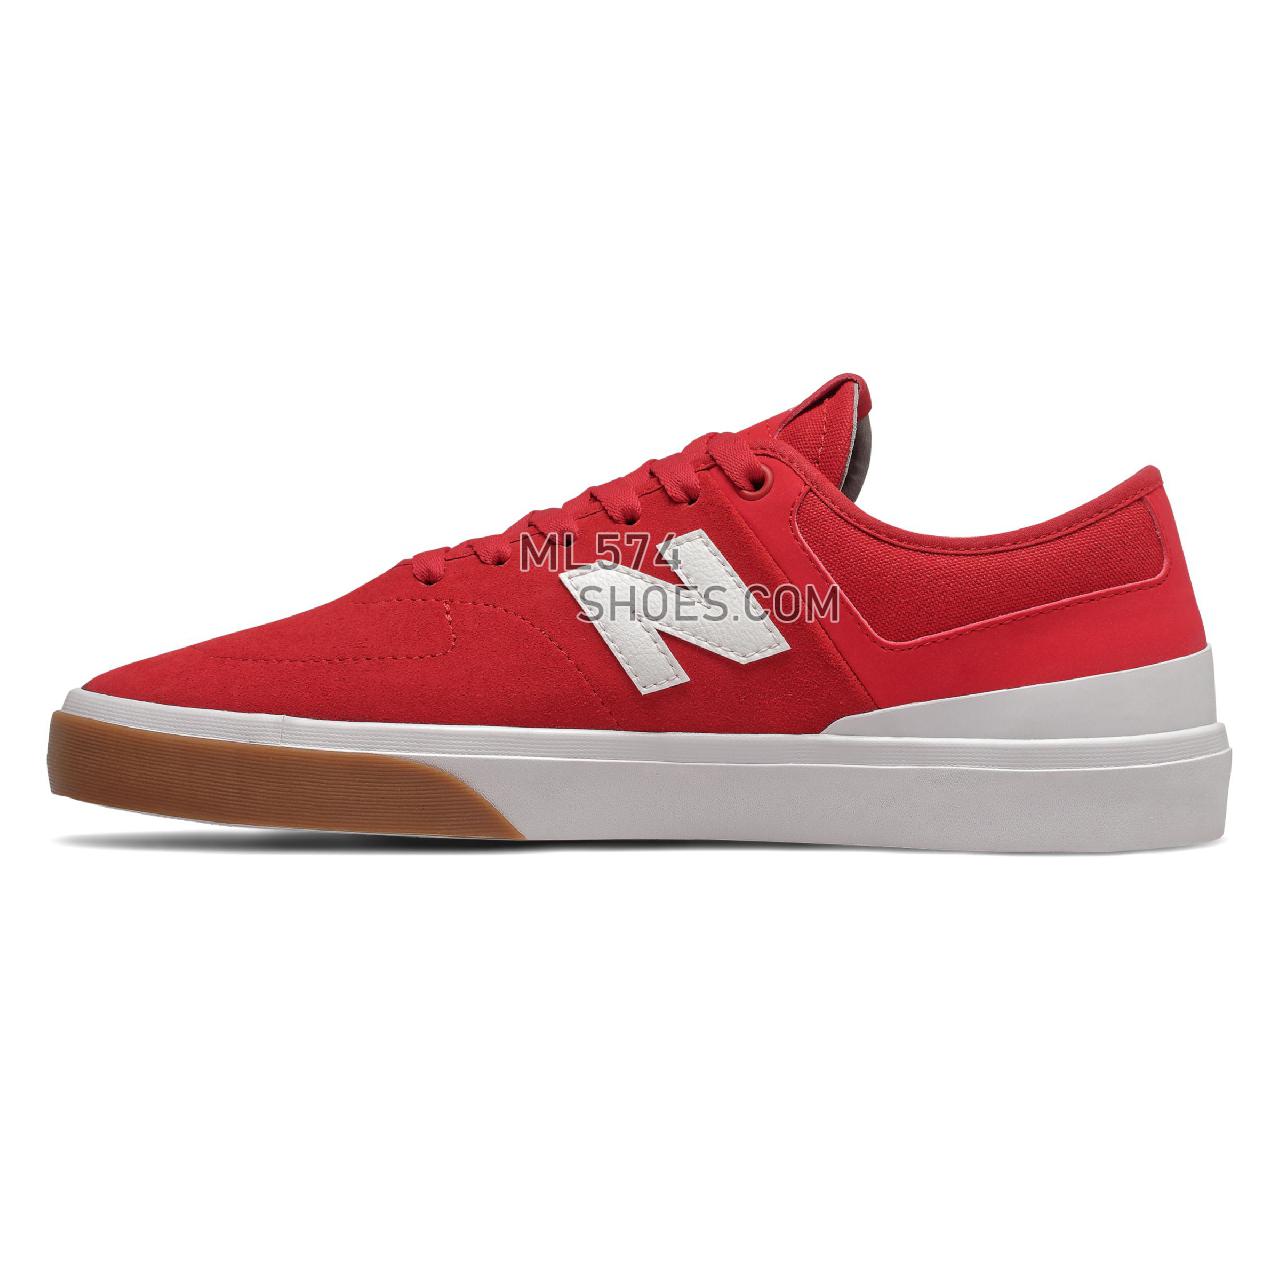 New Balance Numeric 379 - Men's NB Numeric Skate - Red with White - NM379LST